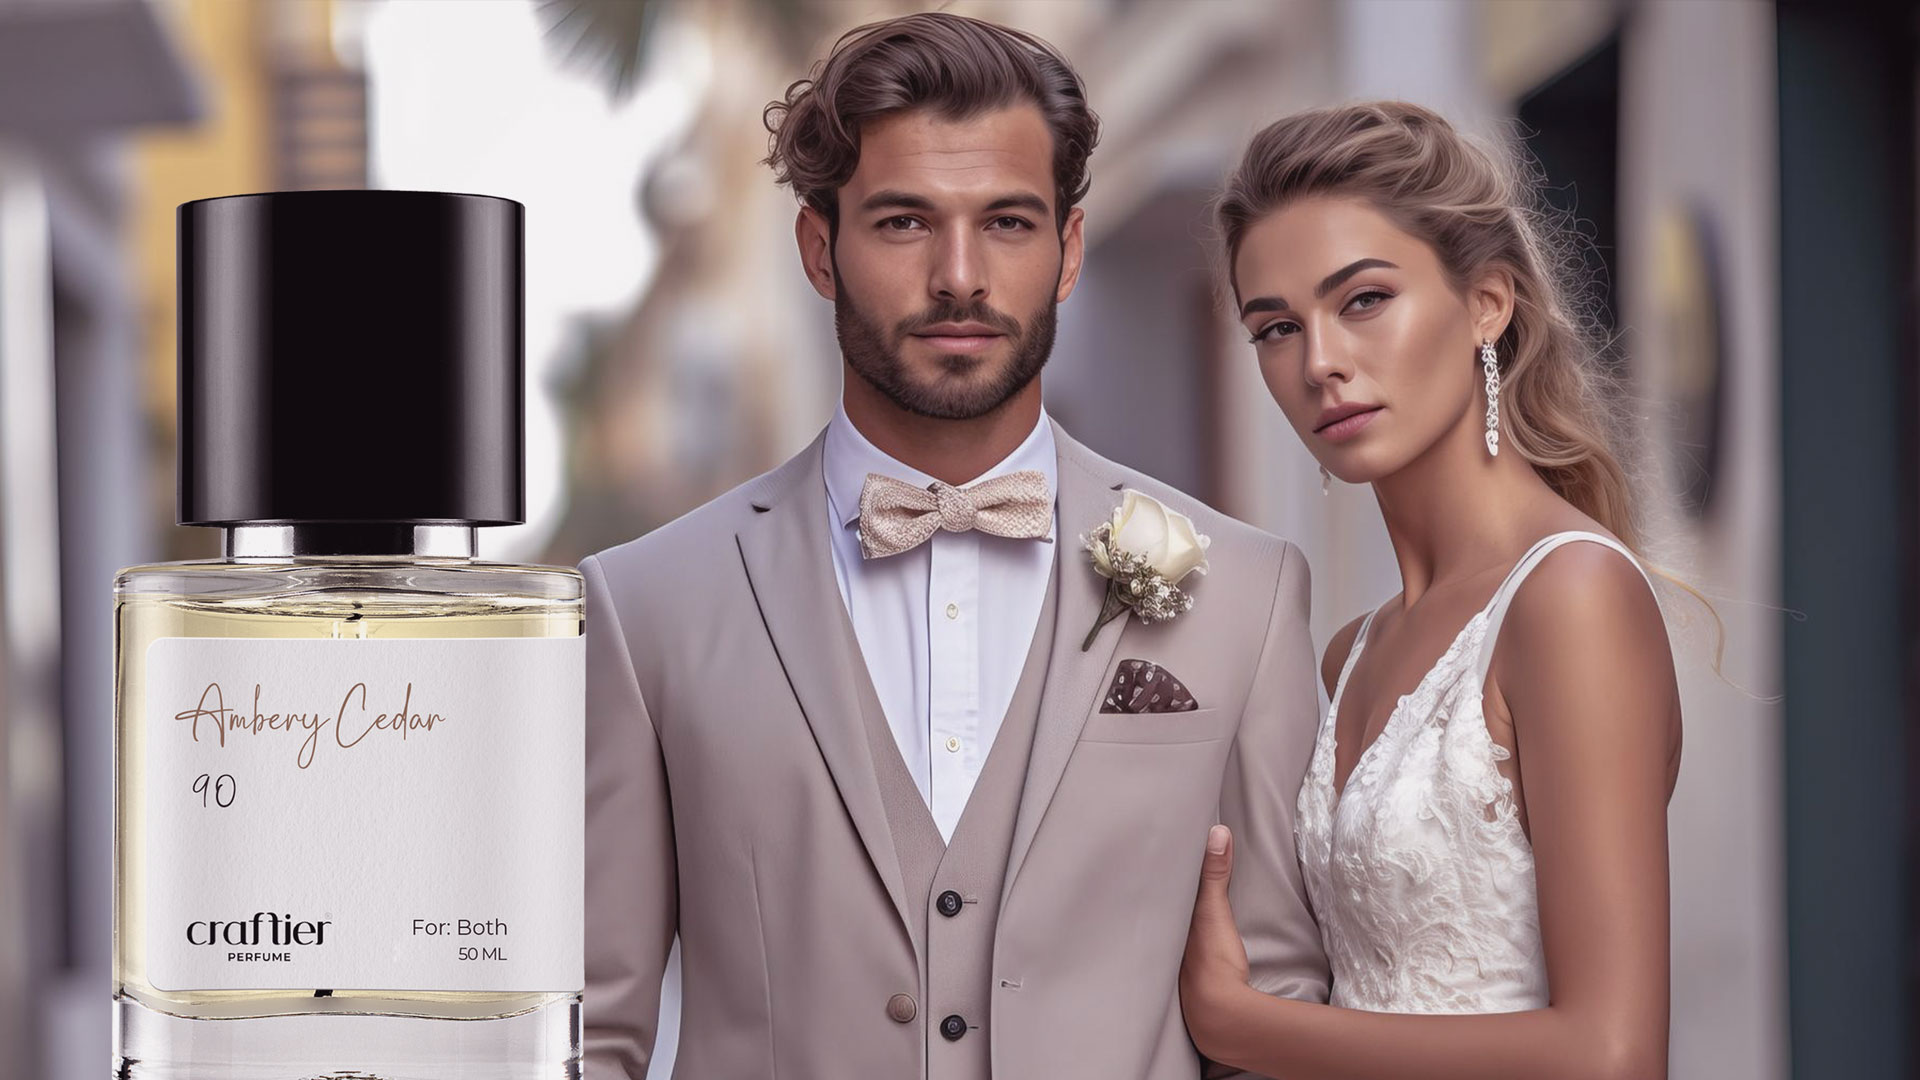 Make Every Occasion Special with the Best Similar Maison Francis Kurkdjian Perfumes